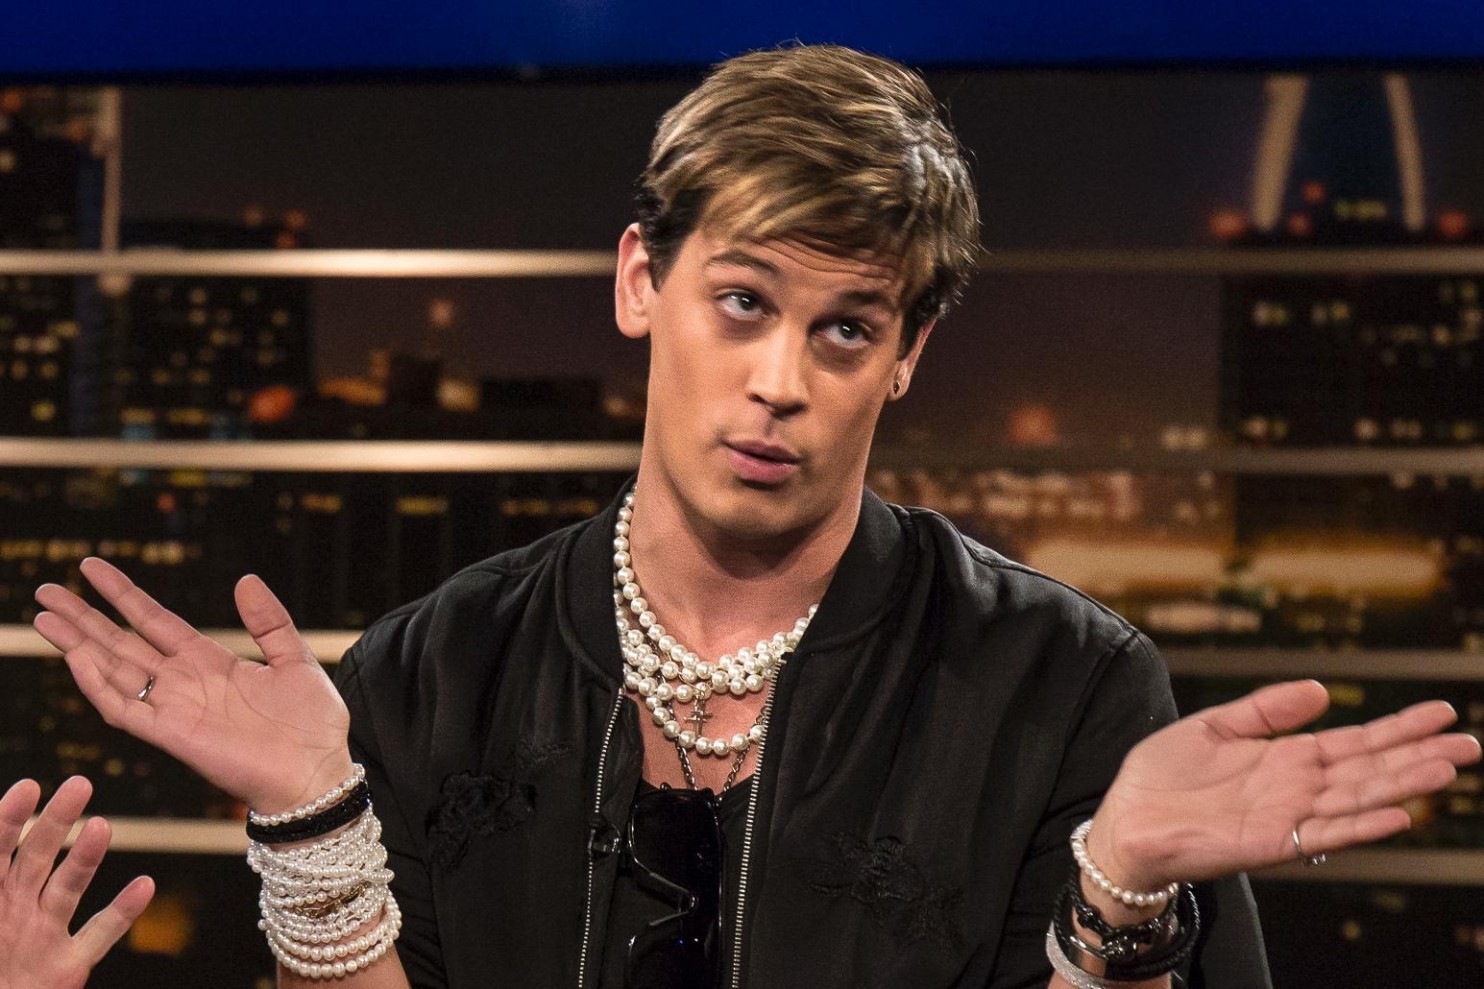 Breitbart’s Milo Yiannopoulos Resigns Following Outrage Over his Past Comments About Pedophilia